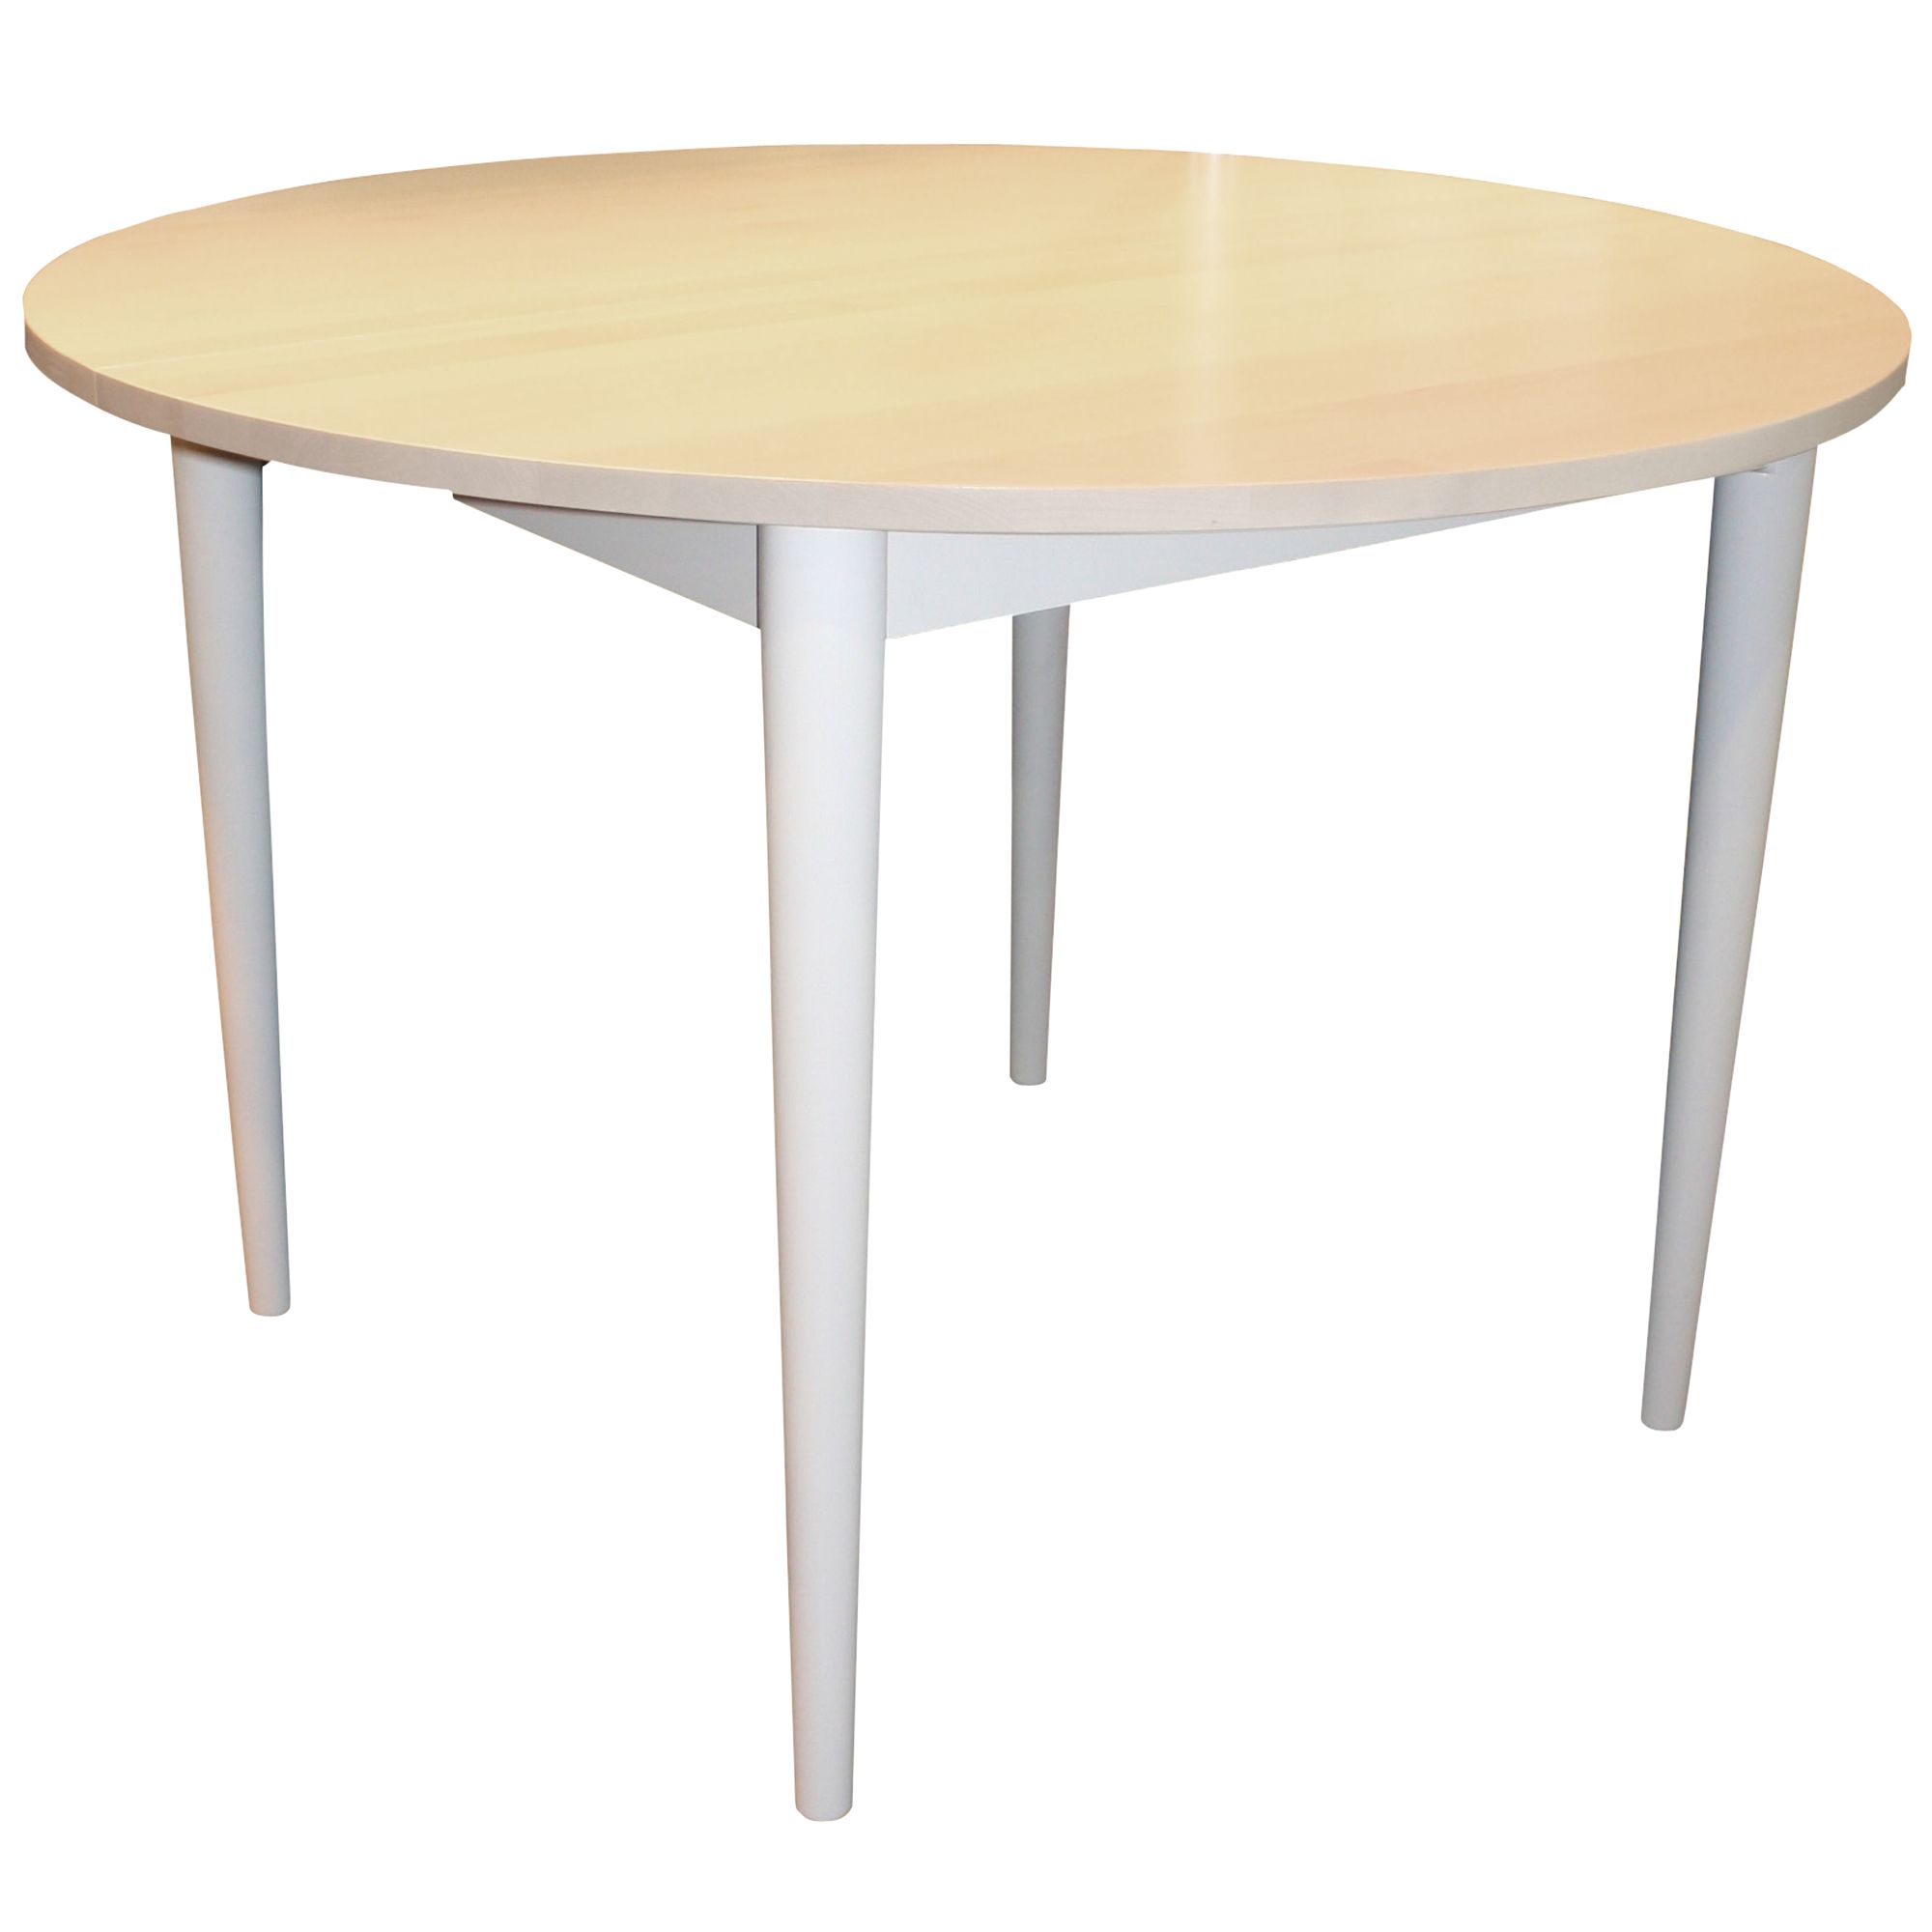 John Lewis Osby Extending Dining Table